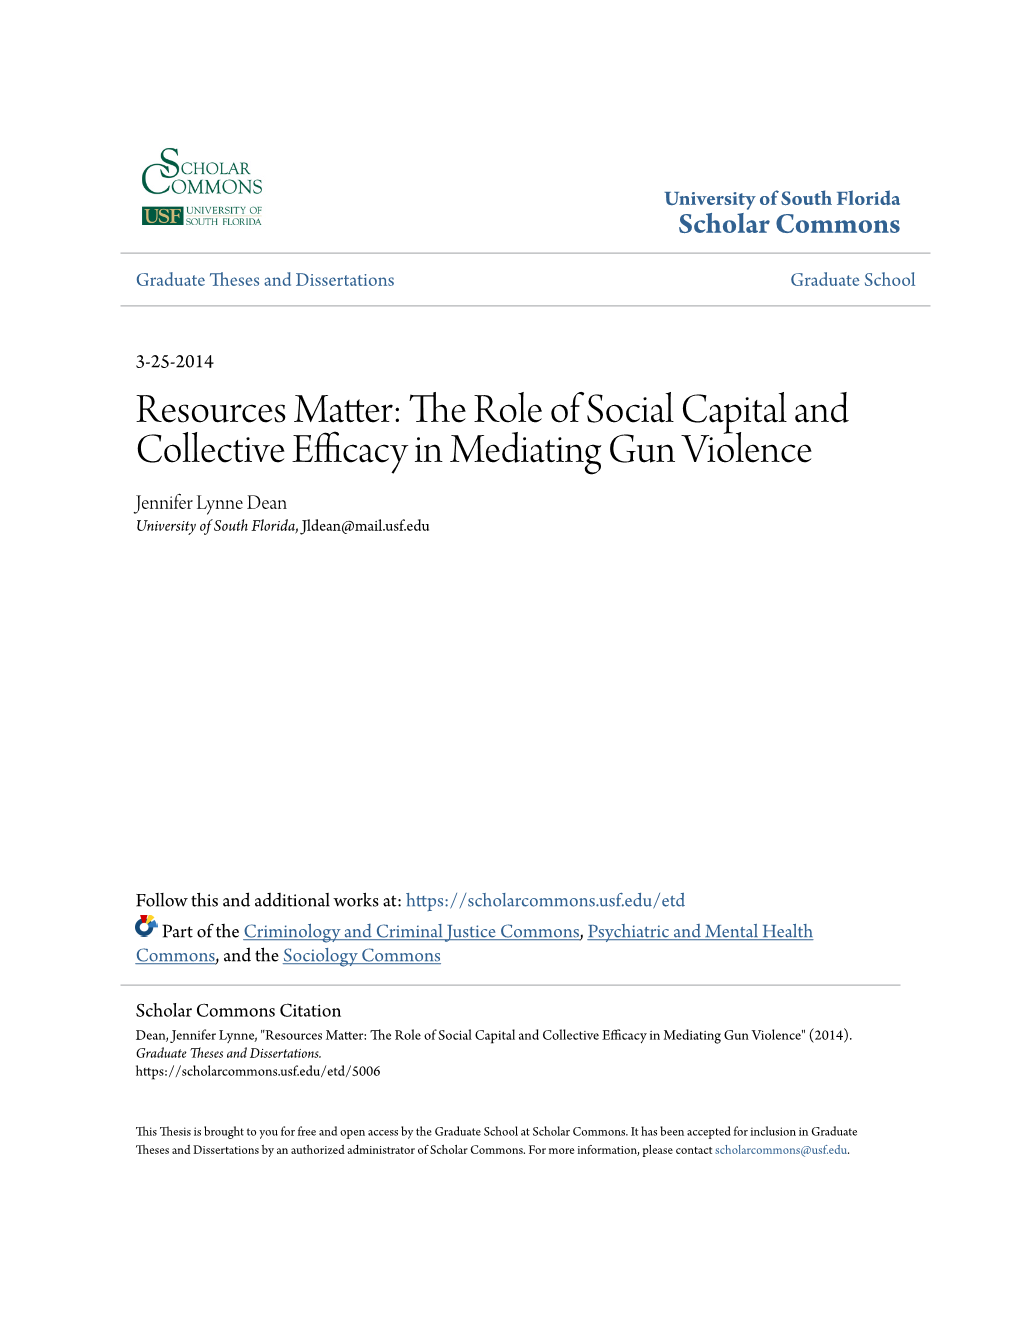 The Role of Social Capital and Collective Efficacy in Mediating Gun Violence Jennifer Lynne Dean University of South Florida, Jldean@Mail.Usf.Edu